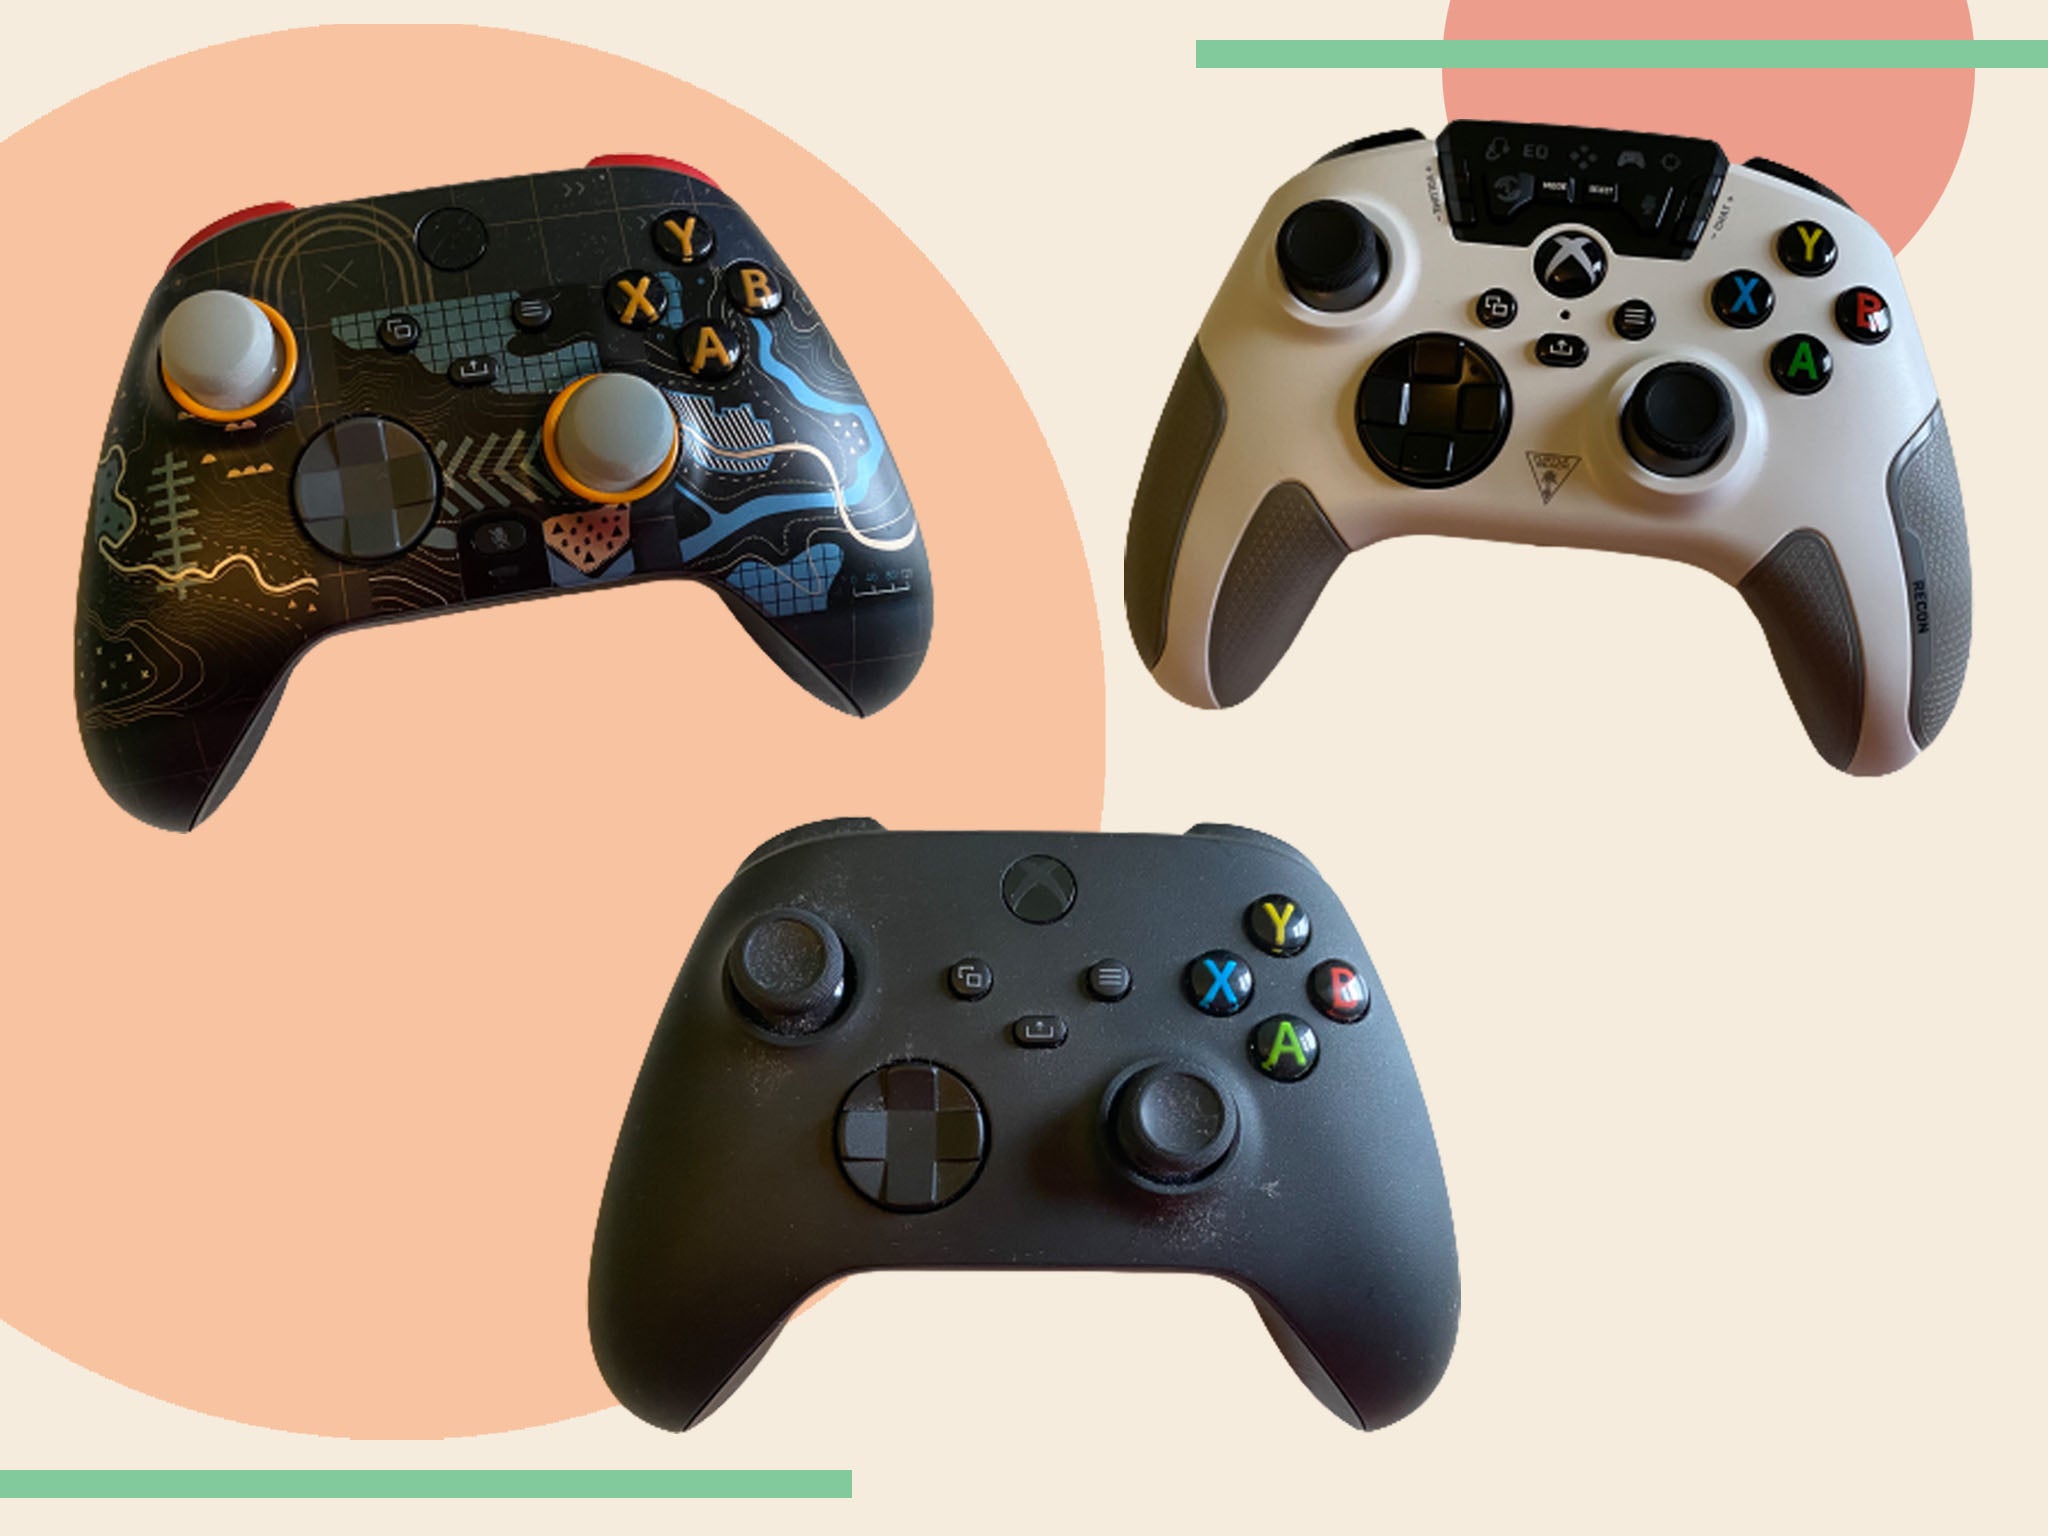 We tested each of these controllers over tens and (in some cases) hundreds of hours